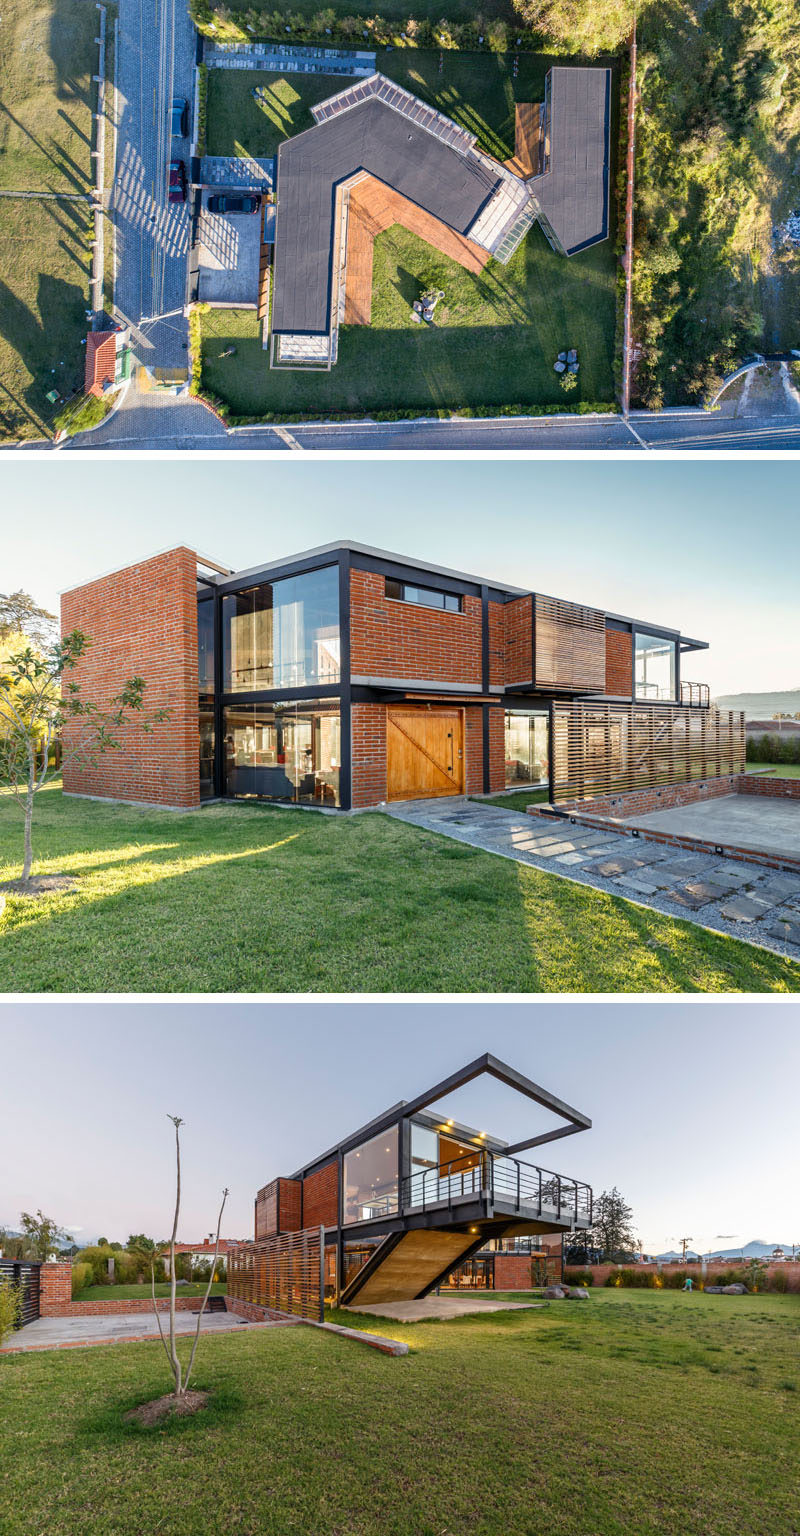 Architecture firm Estudio A0, have designed a brick, glass and steel house in Sangolquí, Ecuador, that has two pavilions, one for the client's own family and one for his parents. #ModernArchitecture #ModernHouse